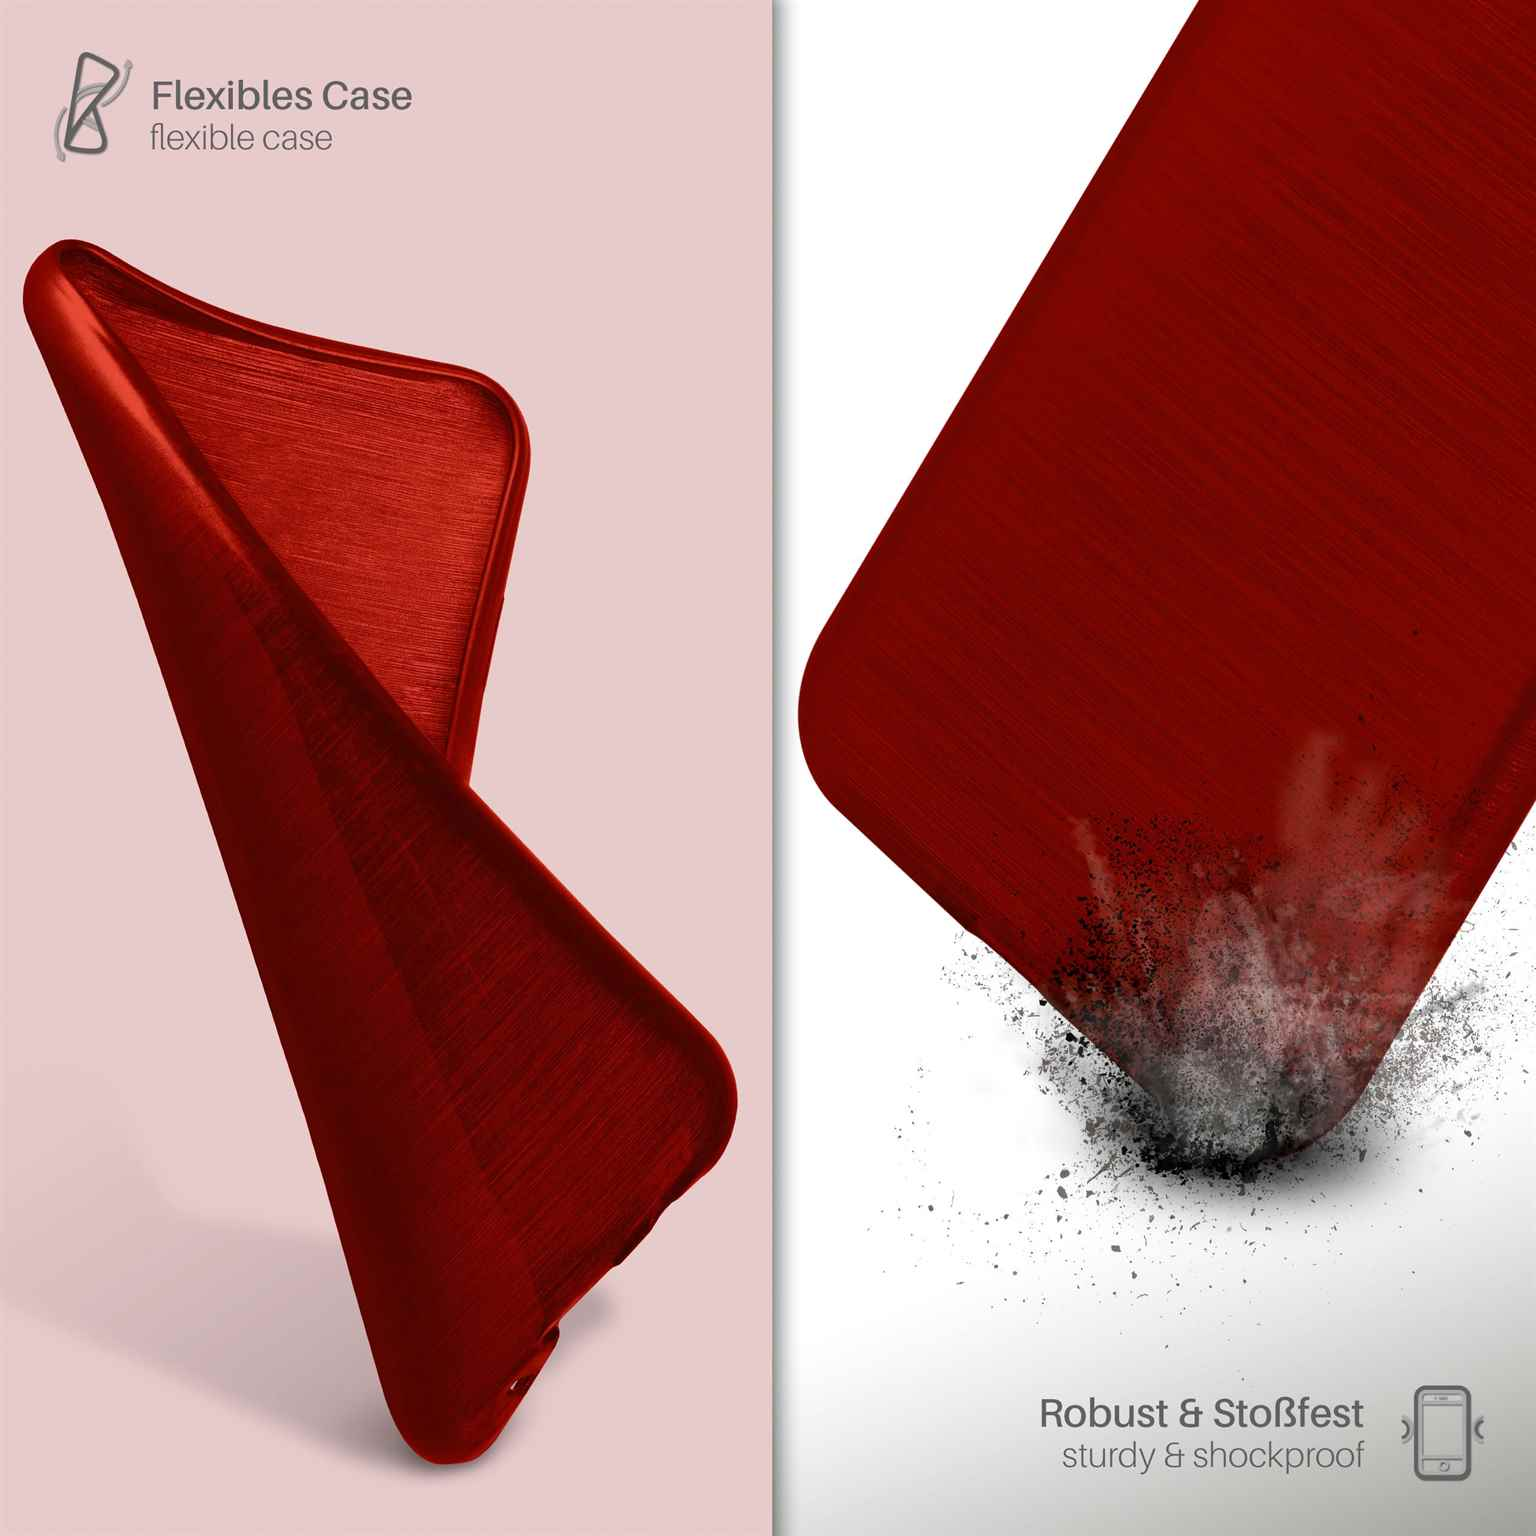 iPhone Backcover, Brushed 6, Case, MOEX Crimson-Red Apple,